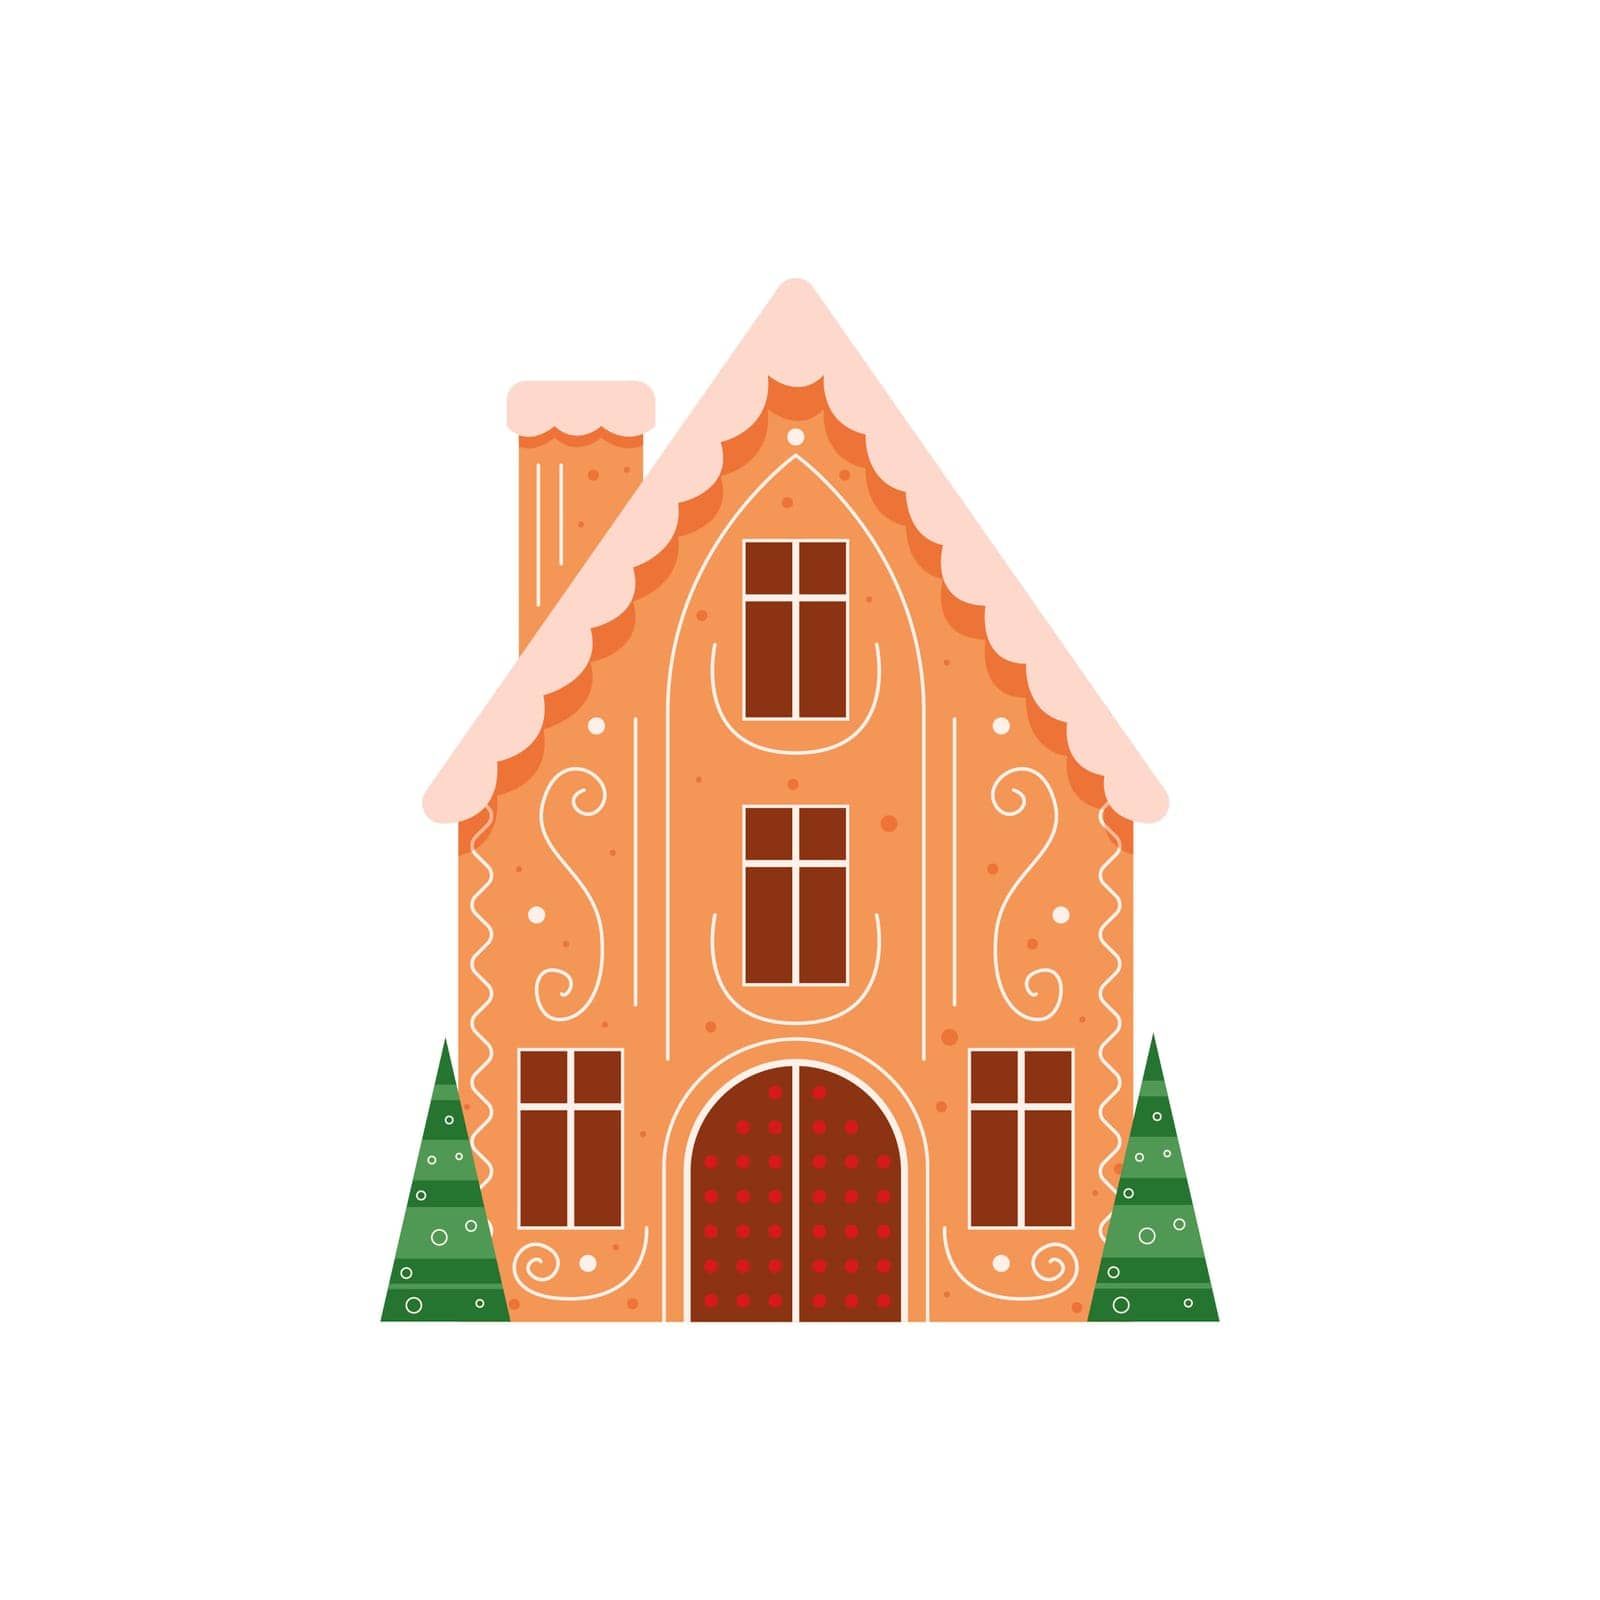 Sweet gingerbread house by Popov